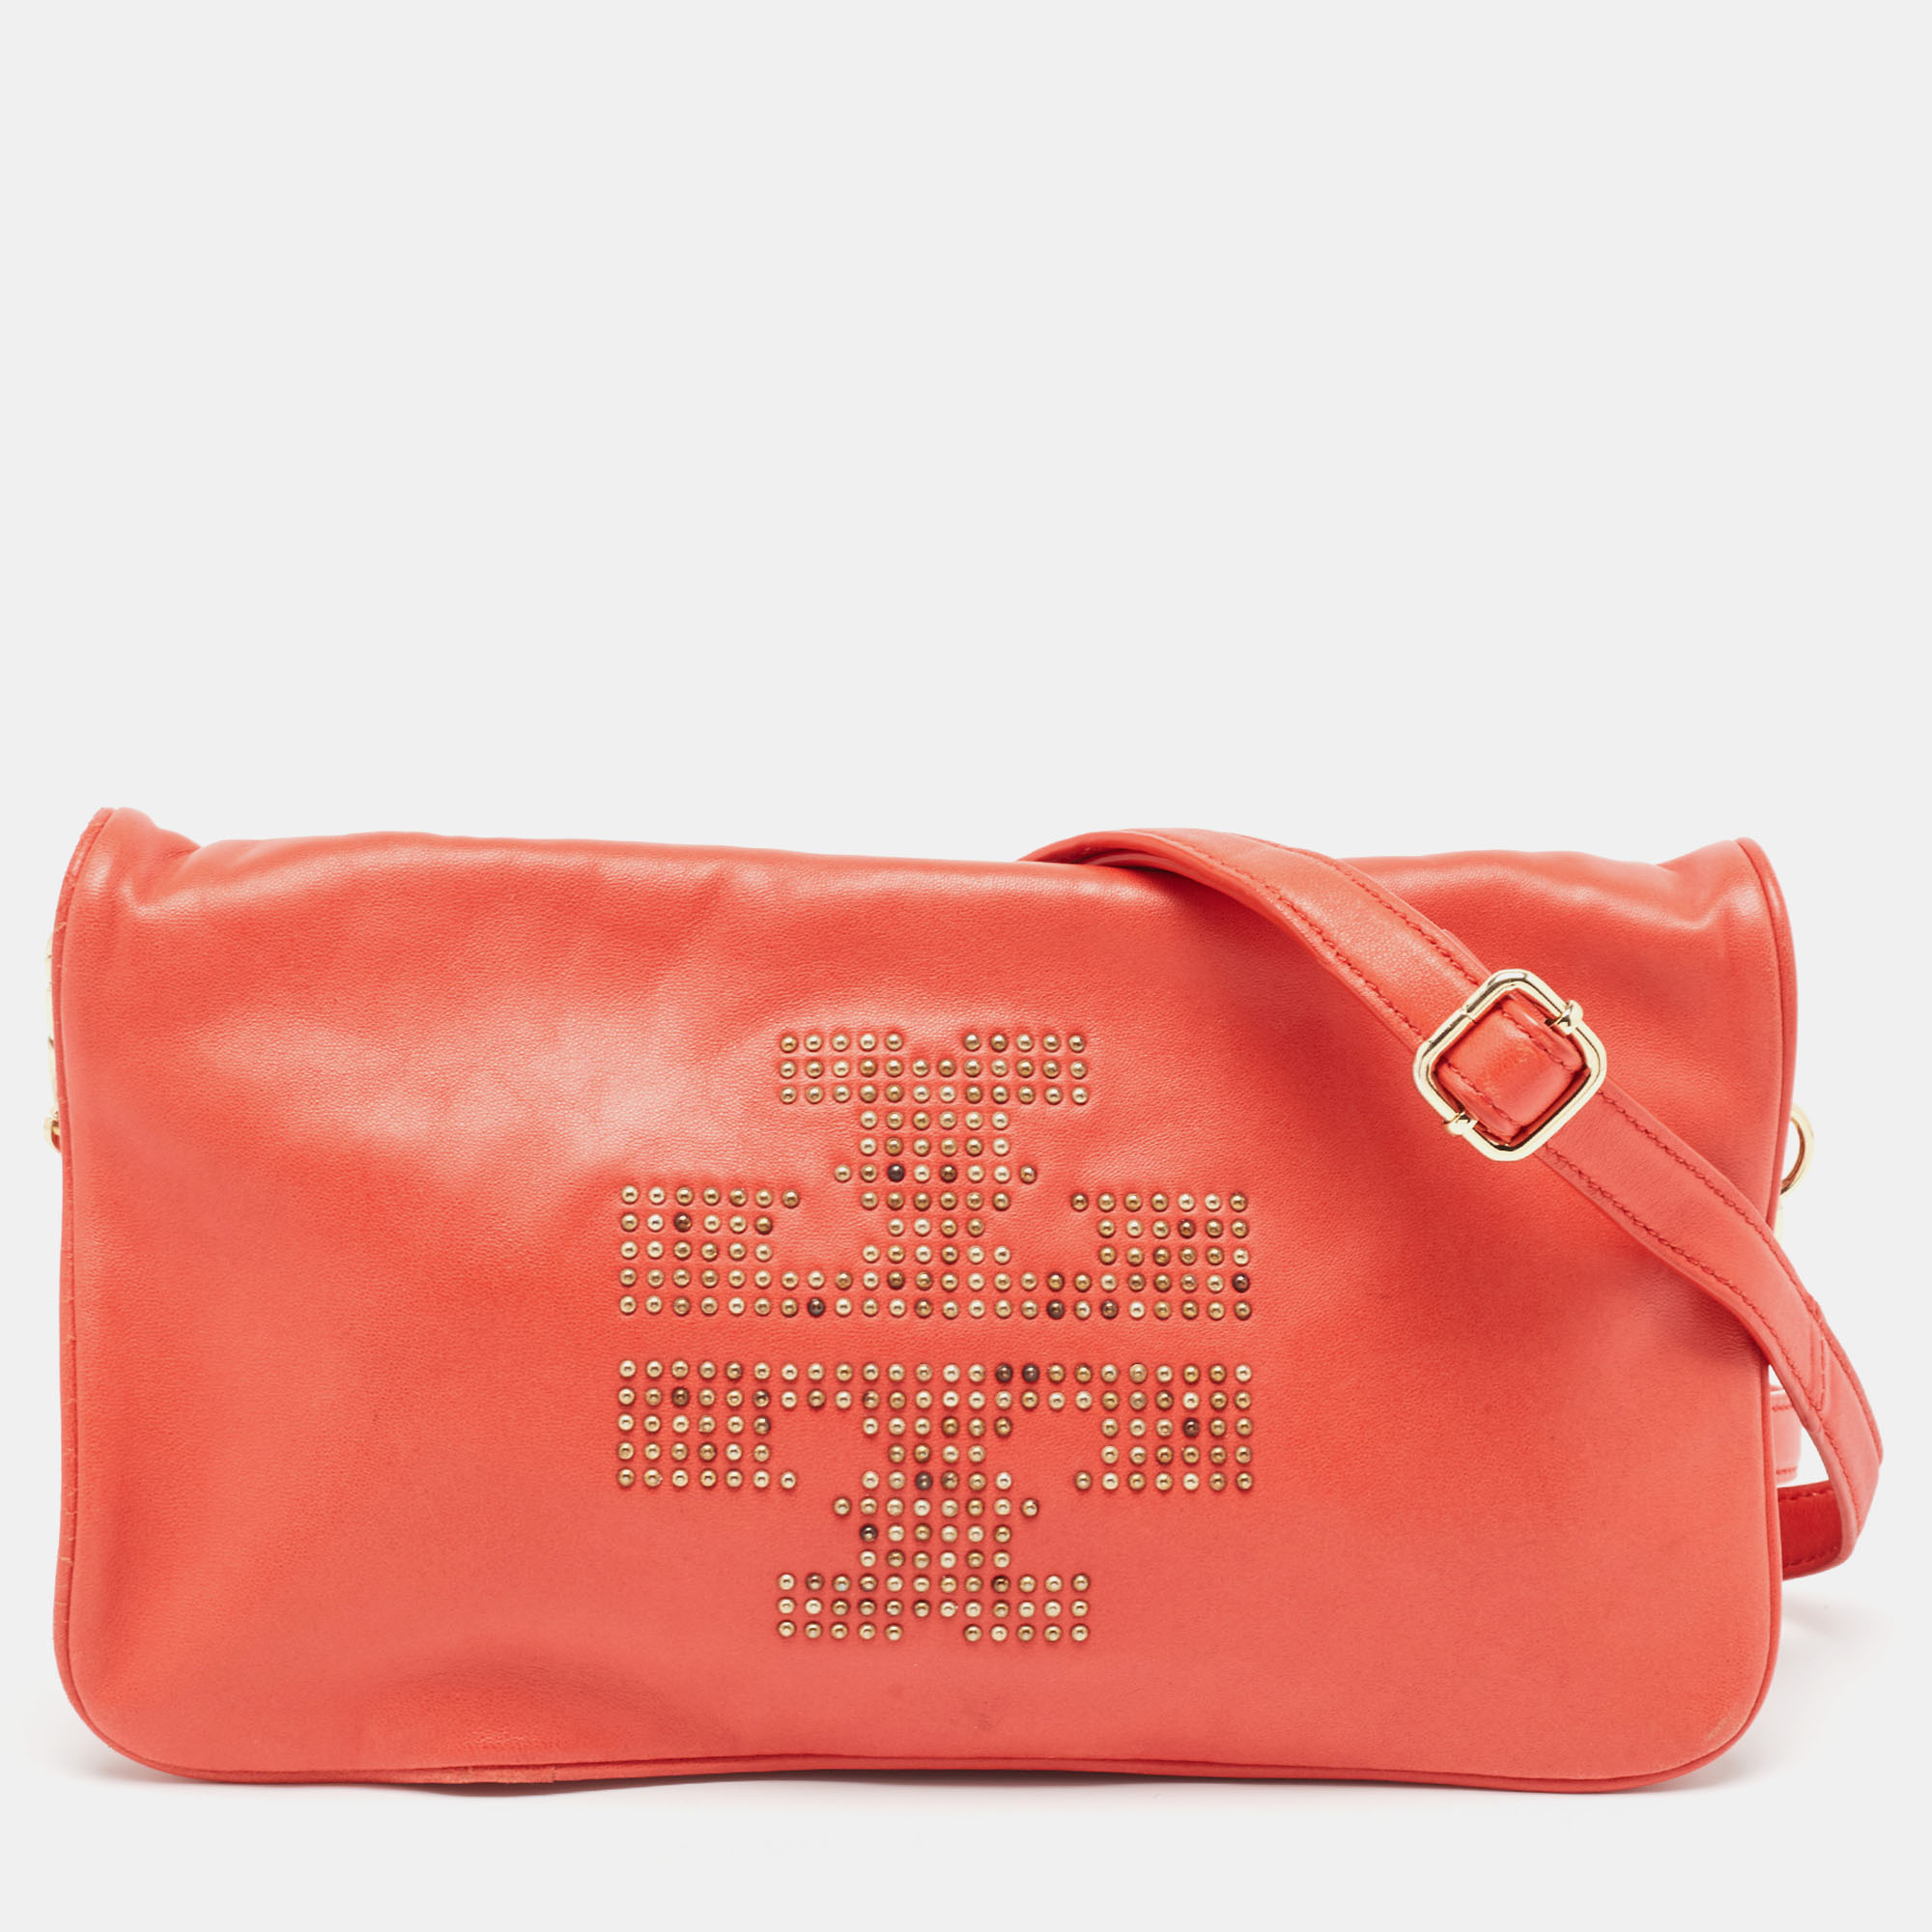 Tory Burch Red Studded Leather Crossbody Bag